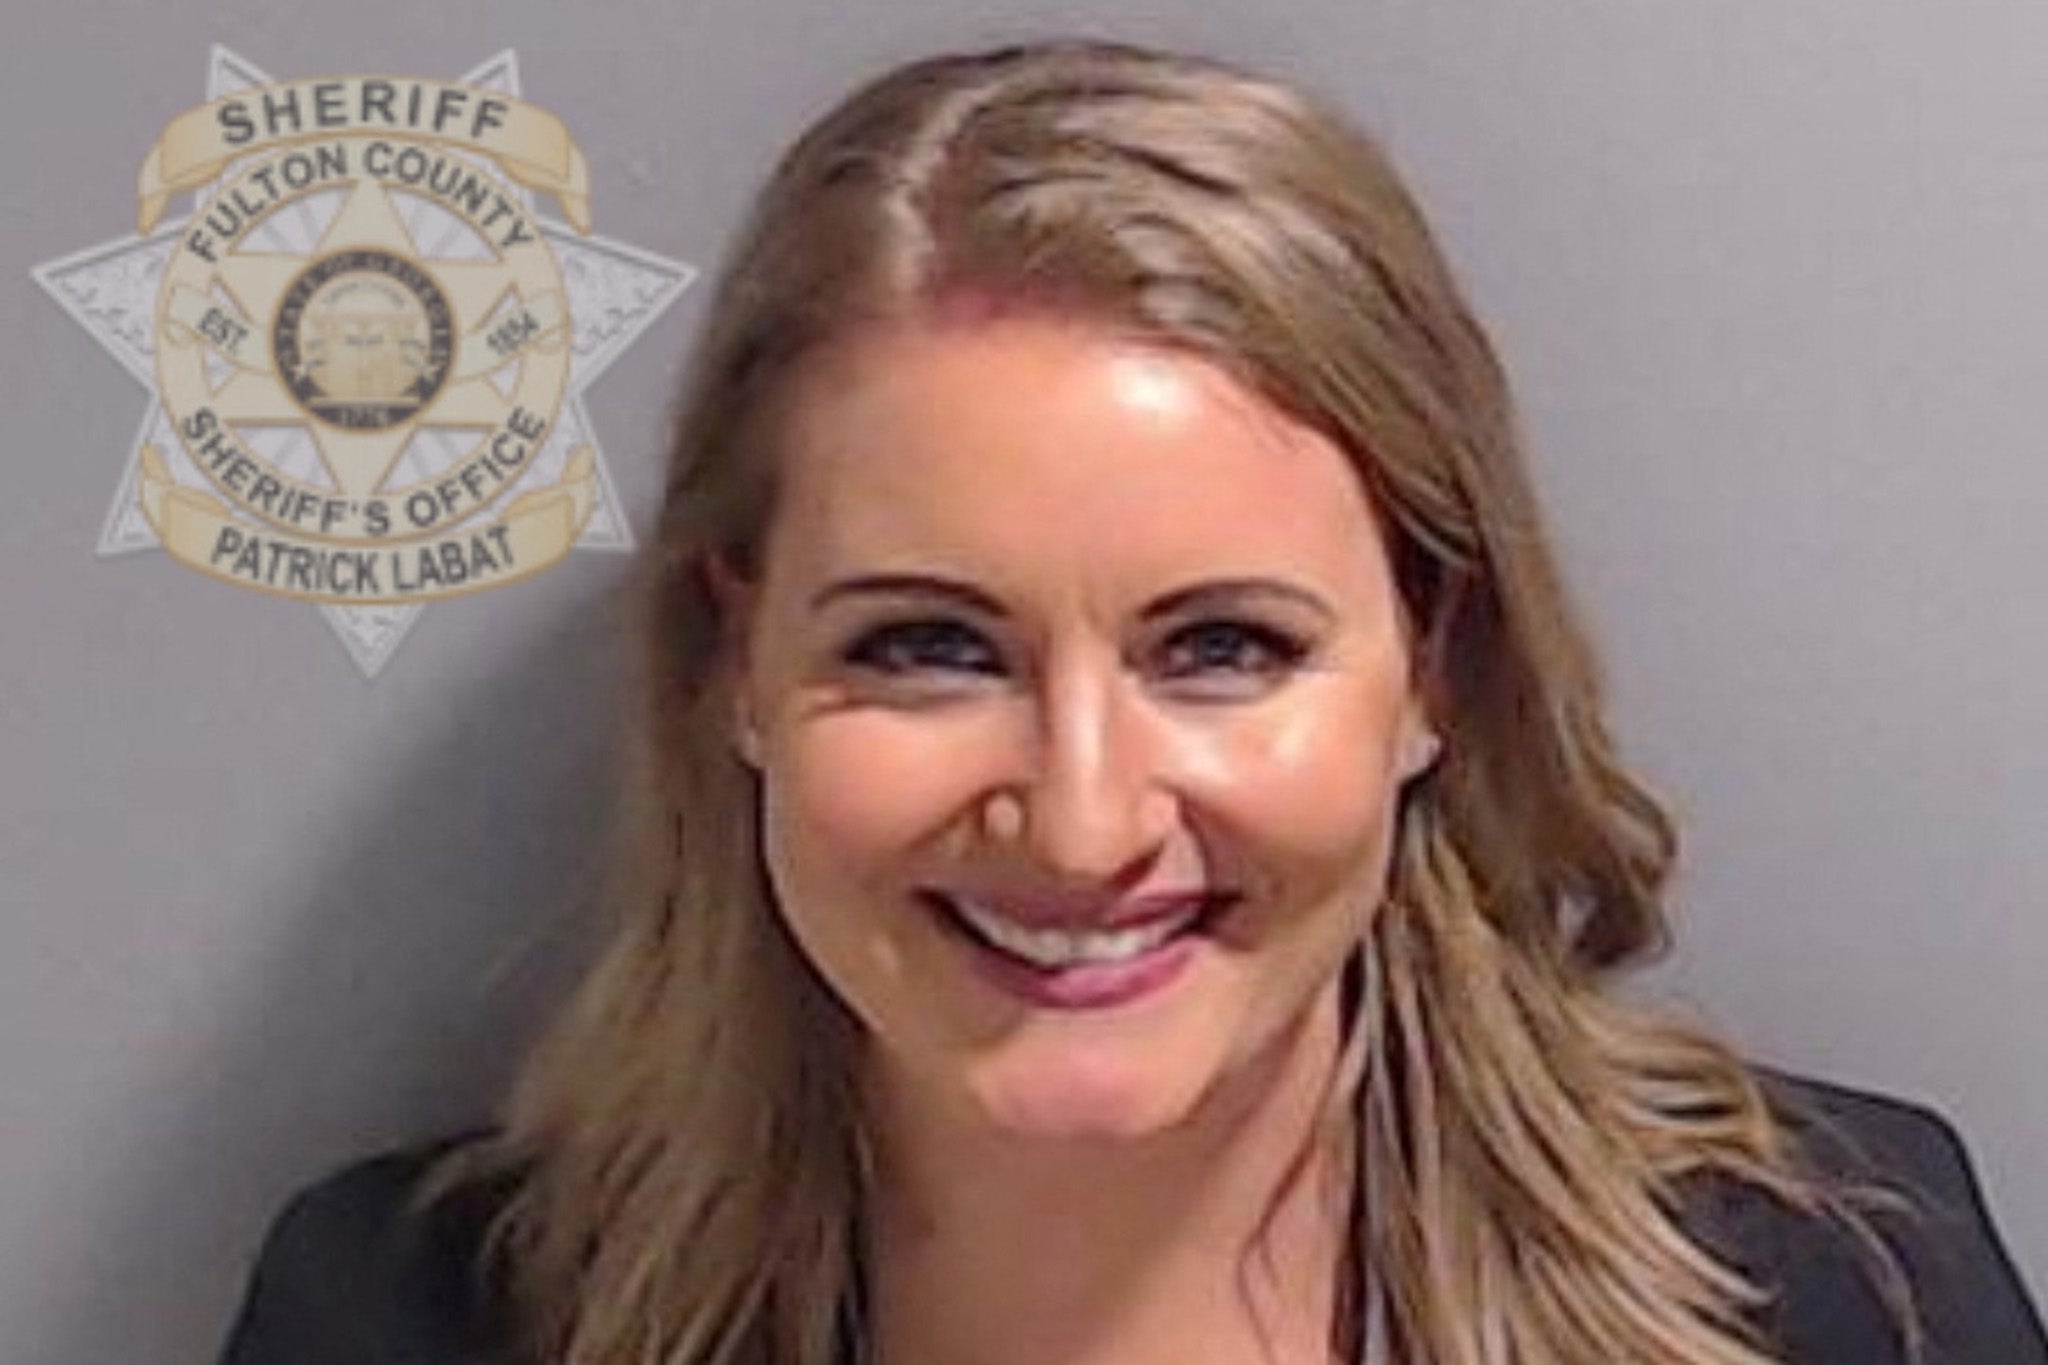 A beaming Jenna Ellis in a booking photo taken in Fulton County in August